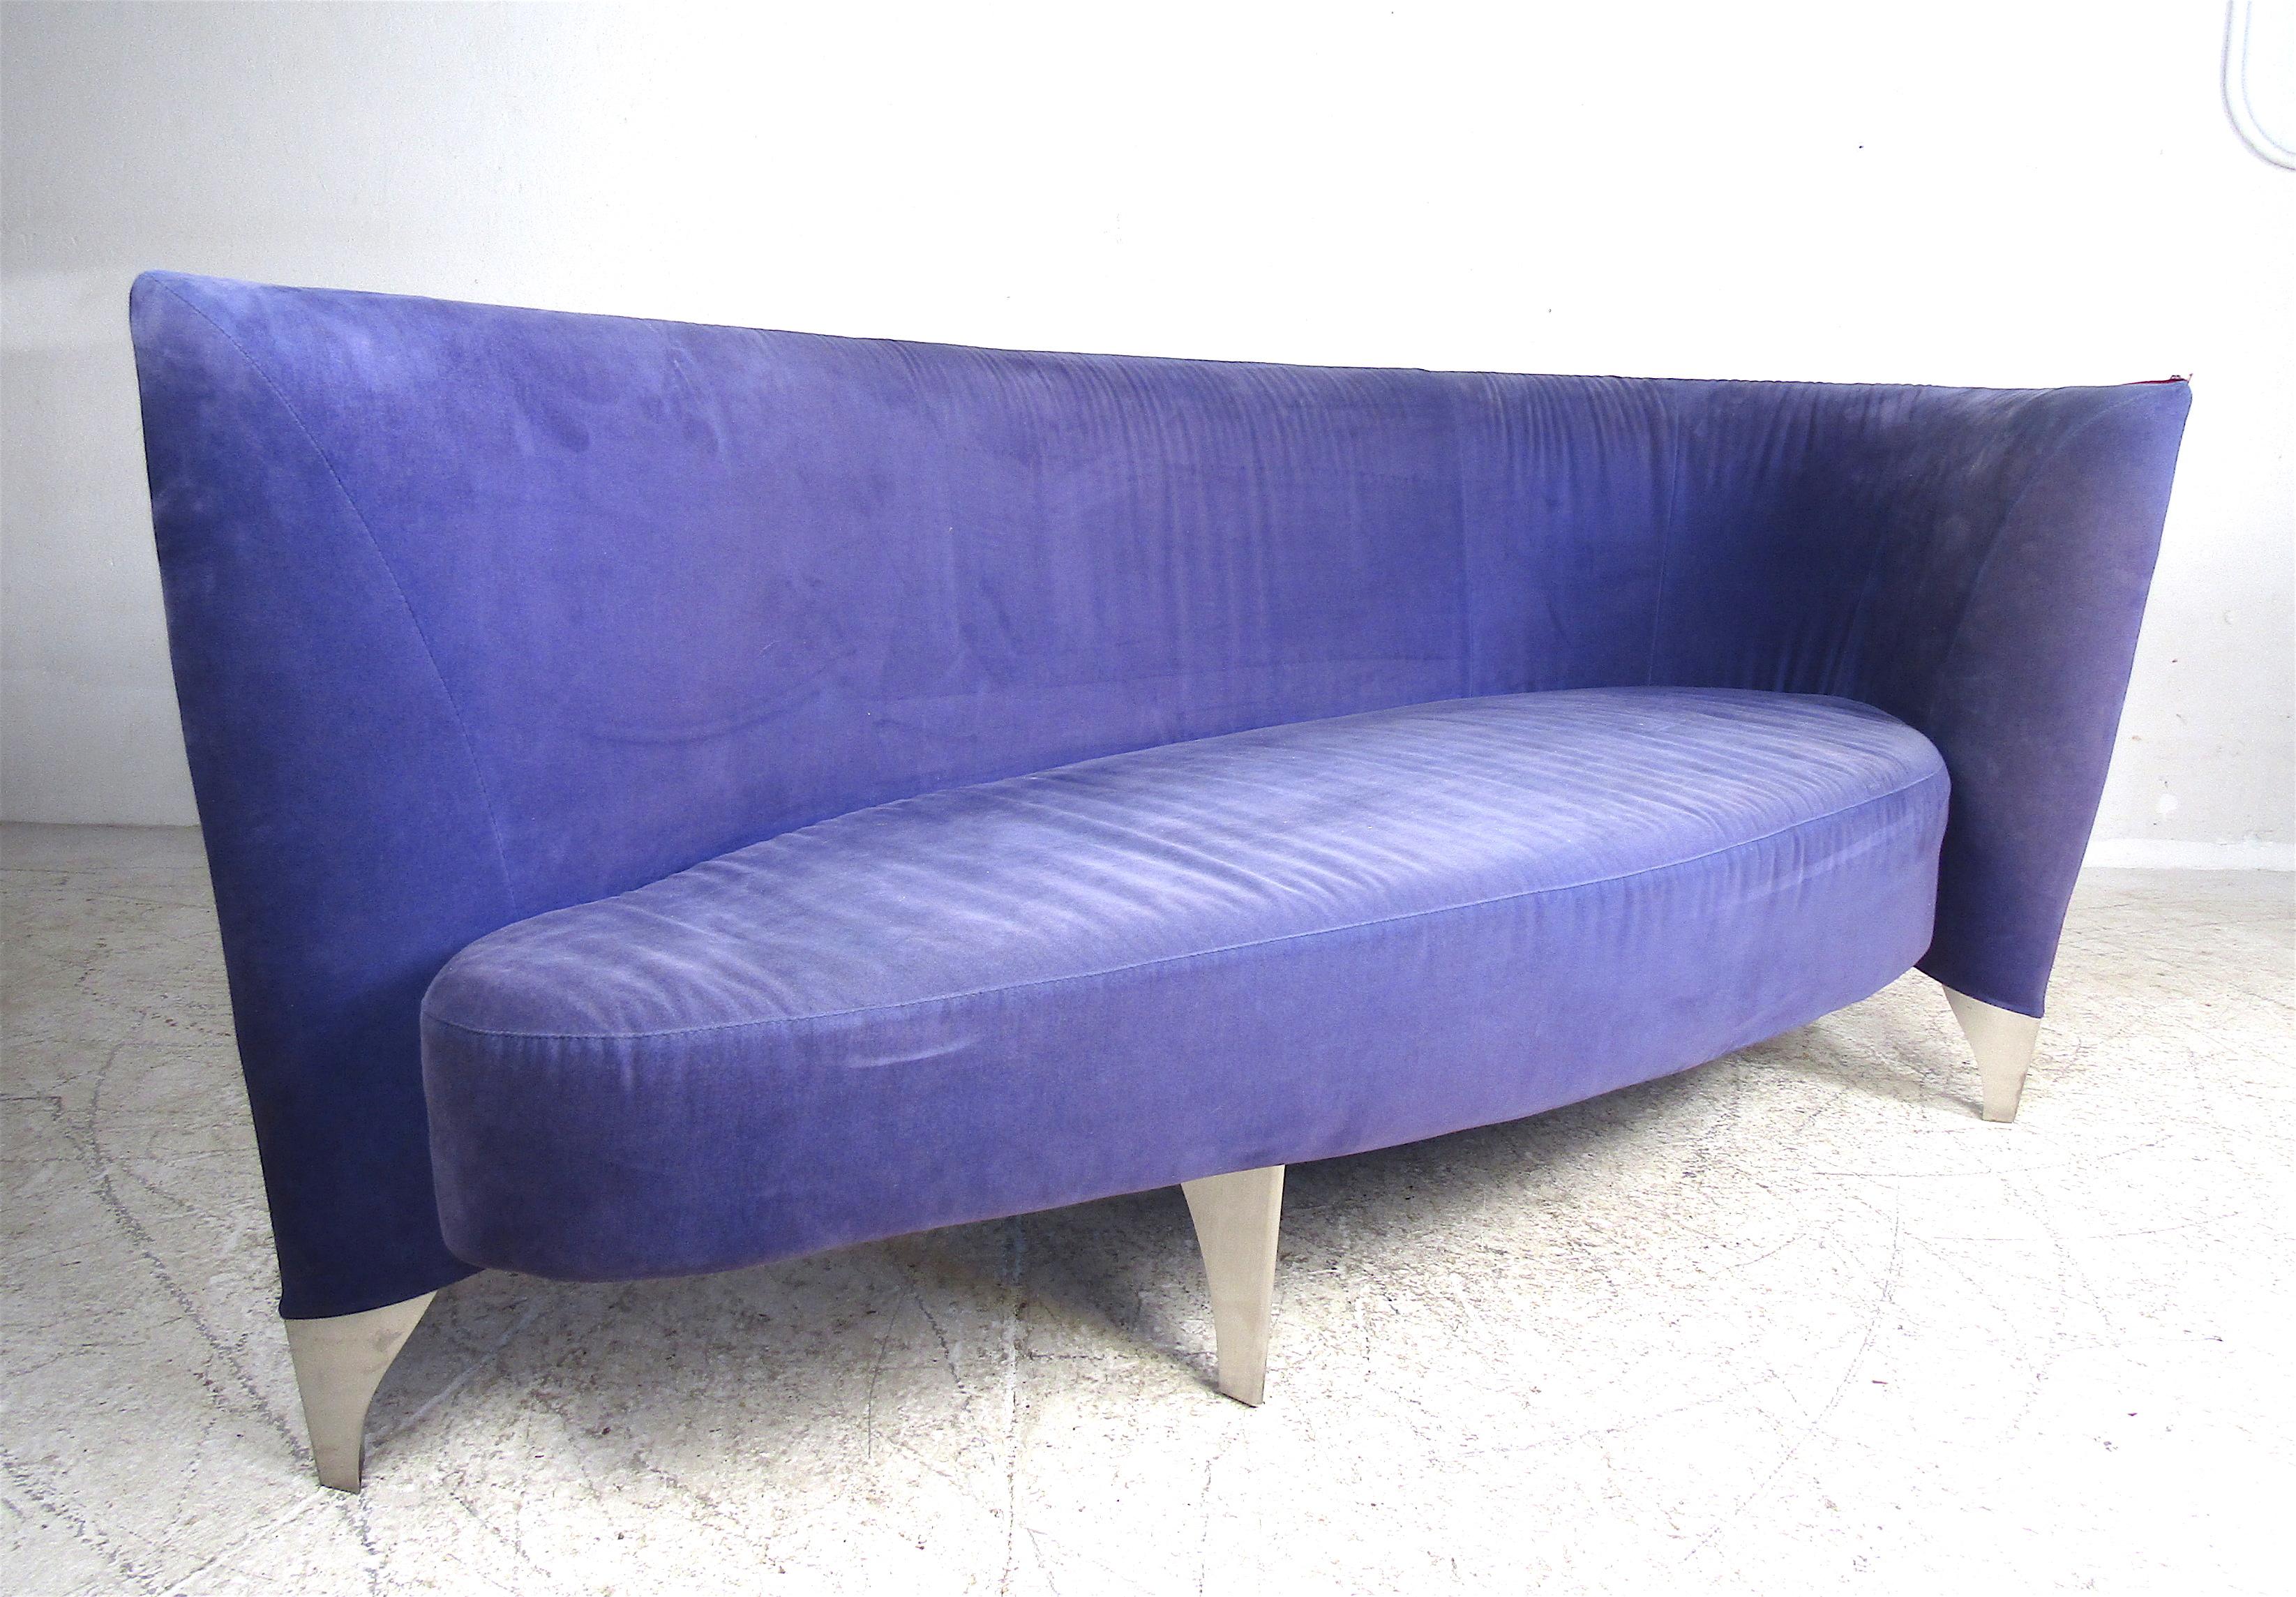 This beautiful two-tone sofa features an unusual wraparound armrest on one side. This funky piece can function as a daybed or a sofa for the living room. The wonderful blue and red velvet fabric complement the silver metal legs. A stylish and sturdy